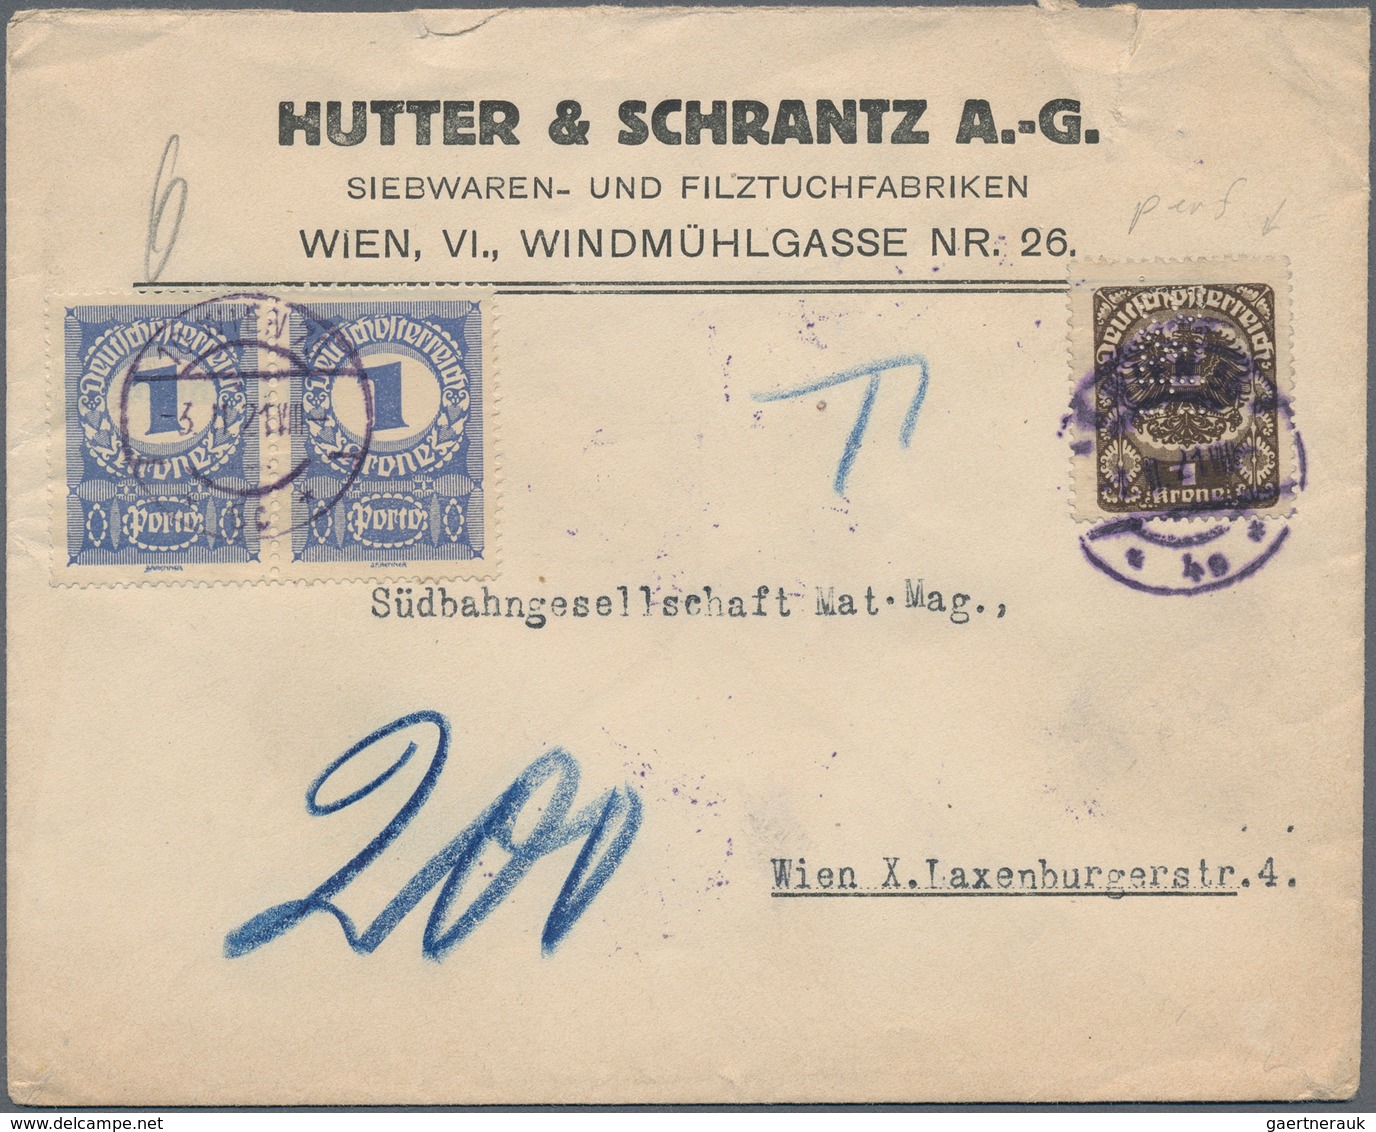 Europa - West: 1890/1945, lot of ca. 200 covers, cards and postal stationeries with many interesting